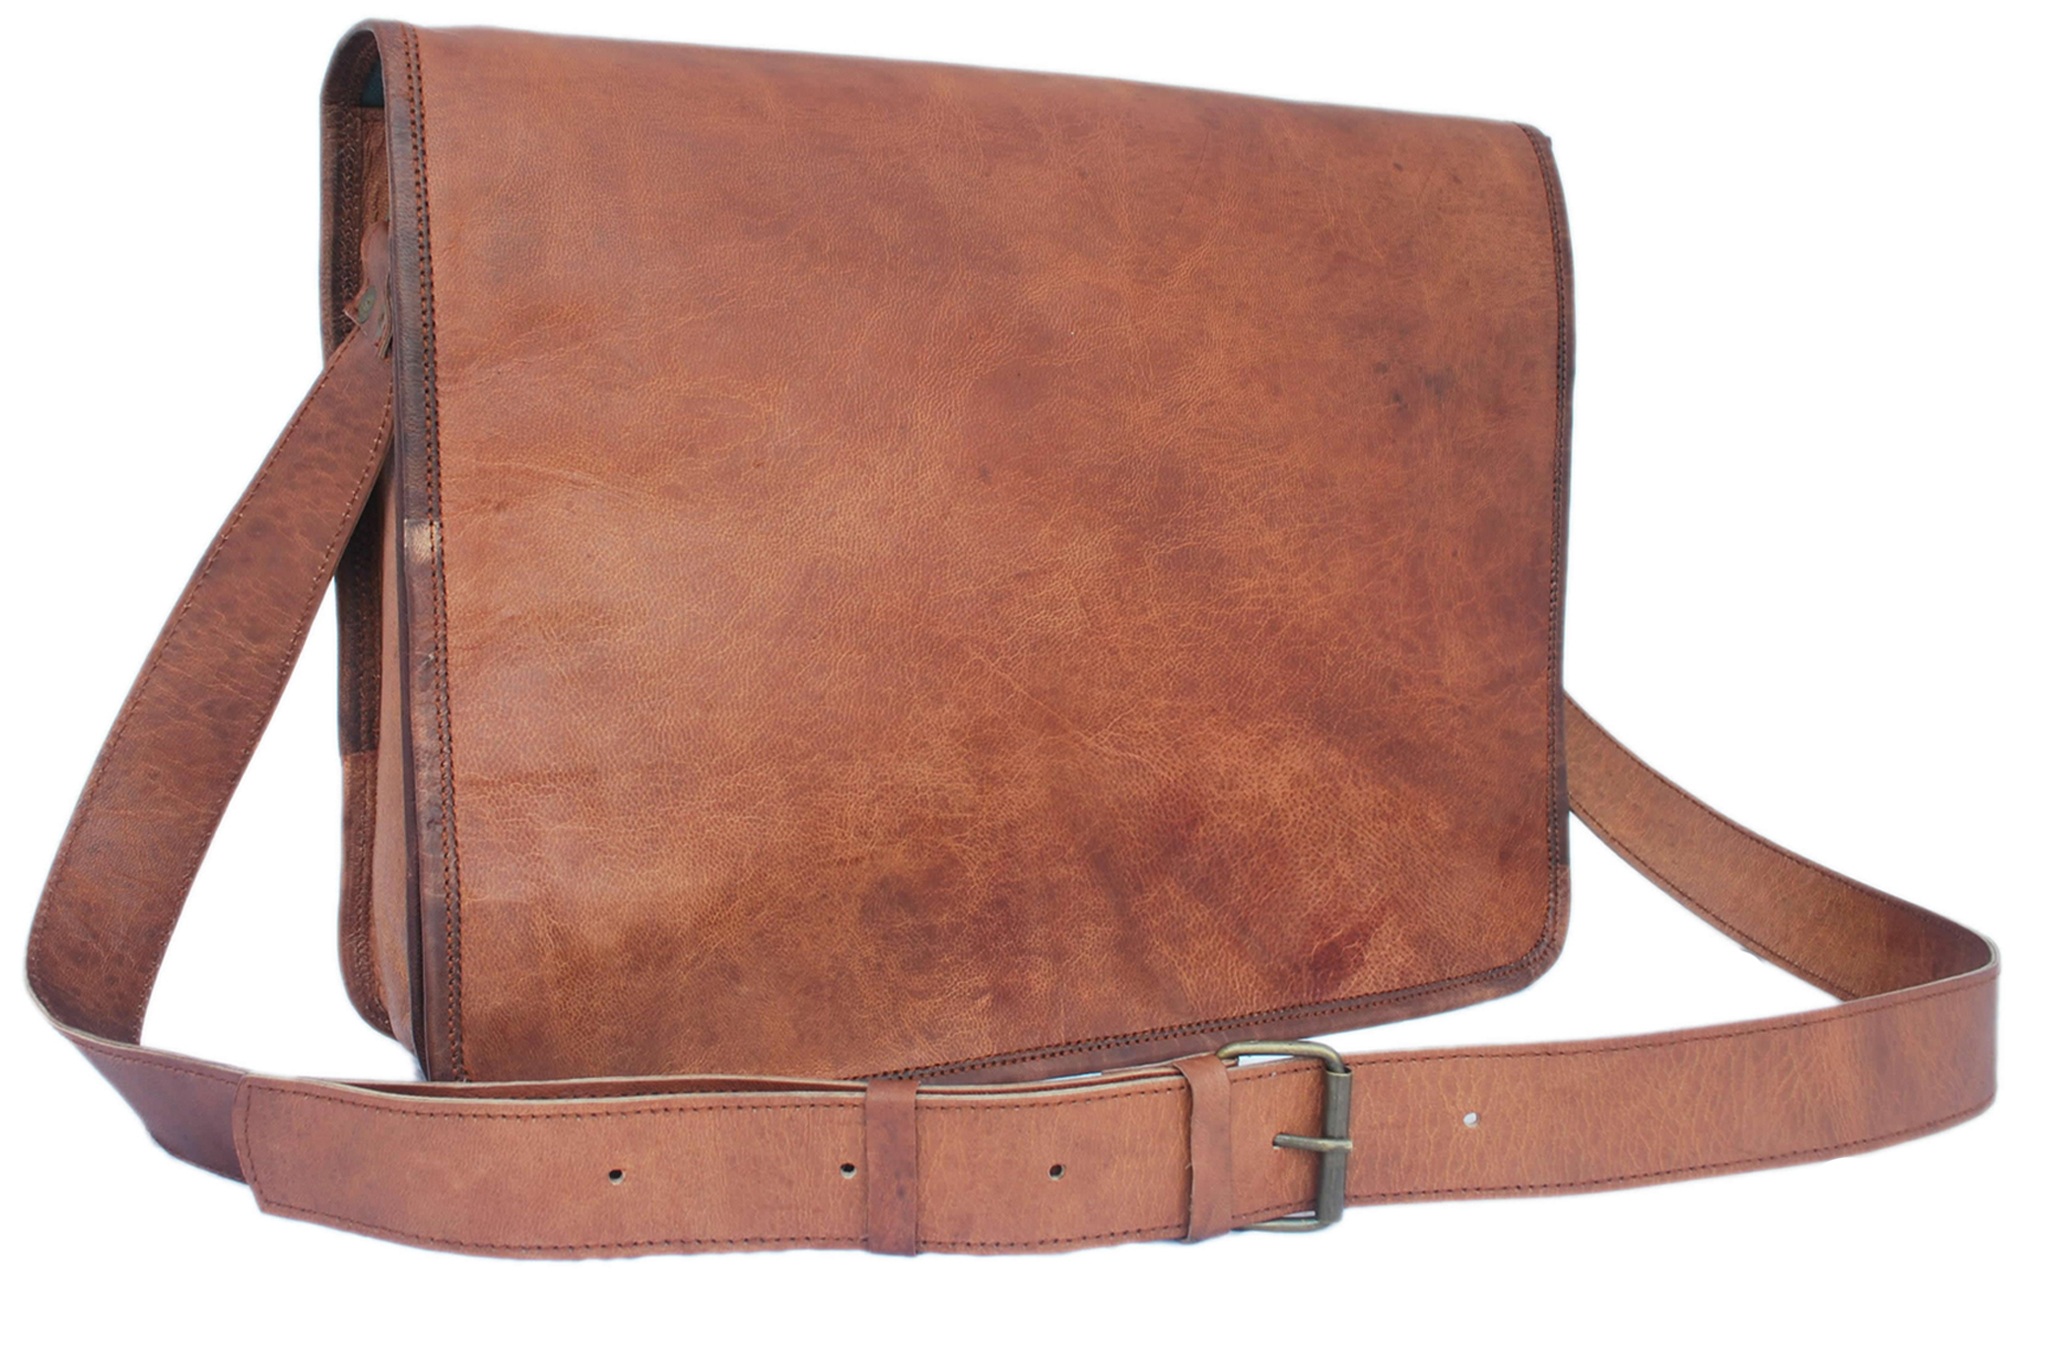 Different Kind Of Leather Messenger Bags For Men's | highonleather